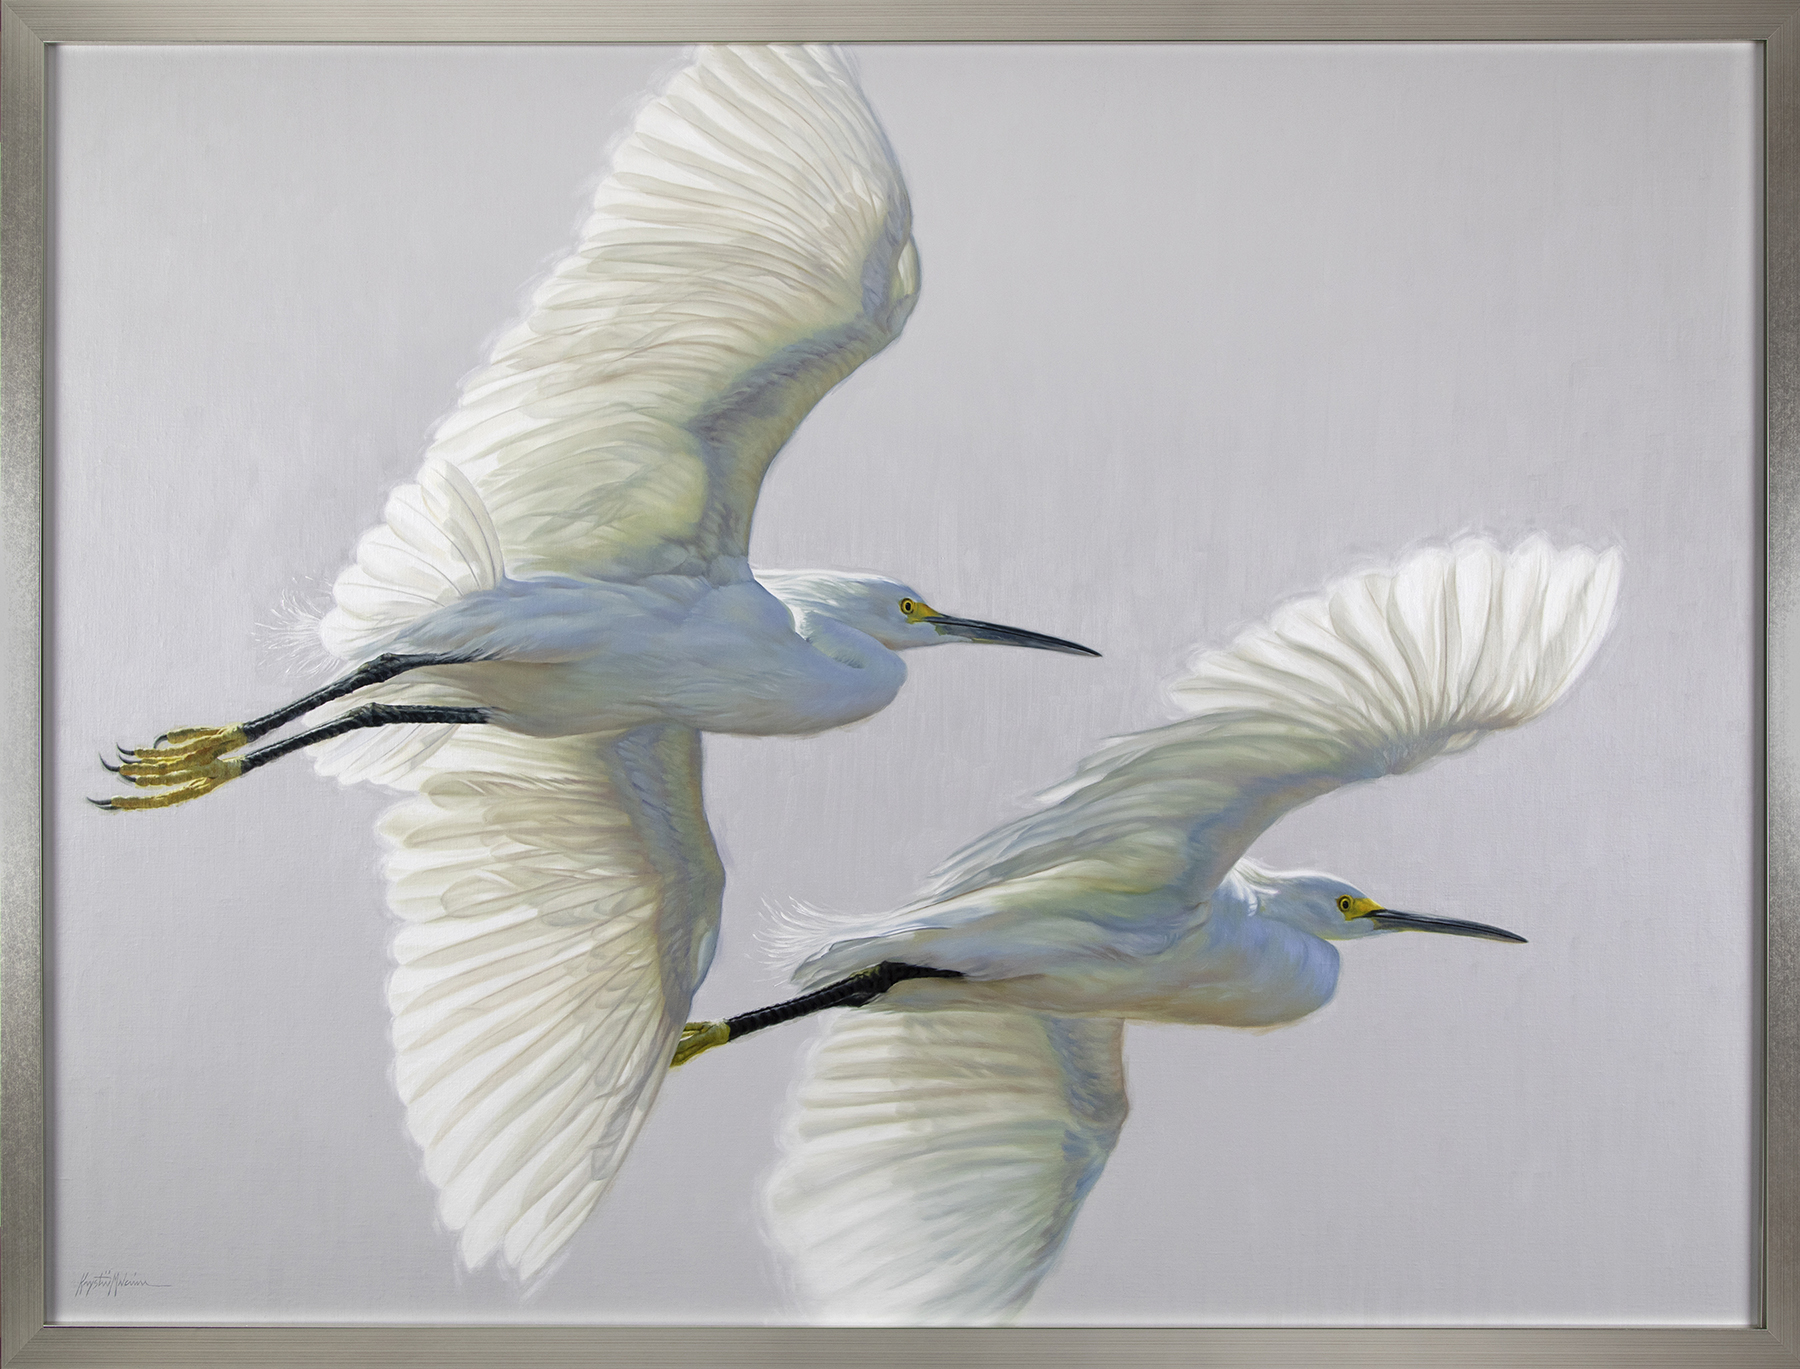 Fllying Home - painting of two flying little egrets against a light grey sky.